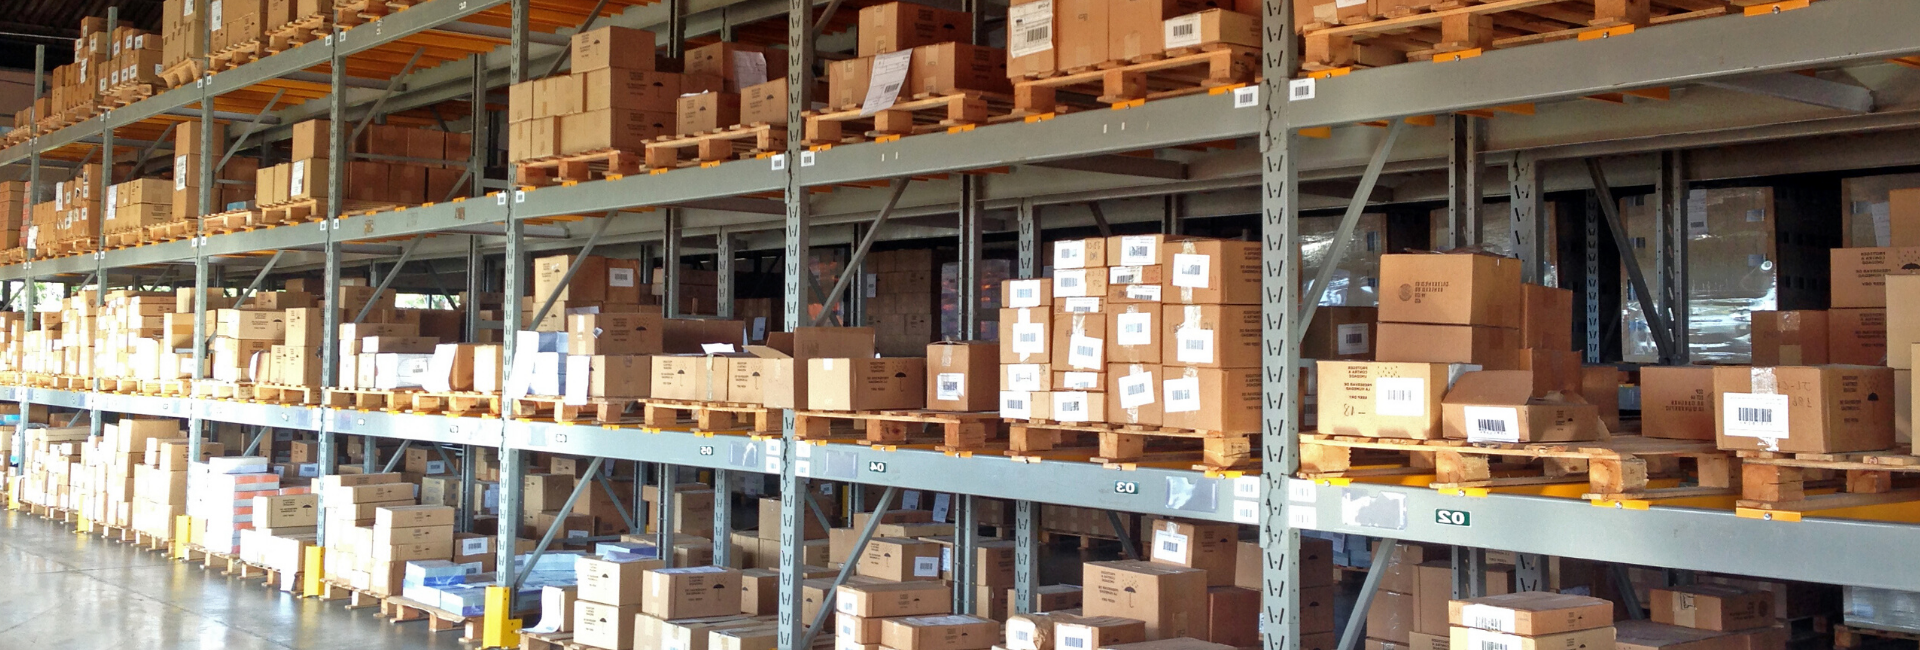 warehouse, inventory allocation